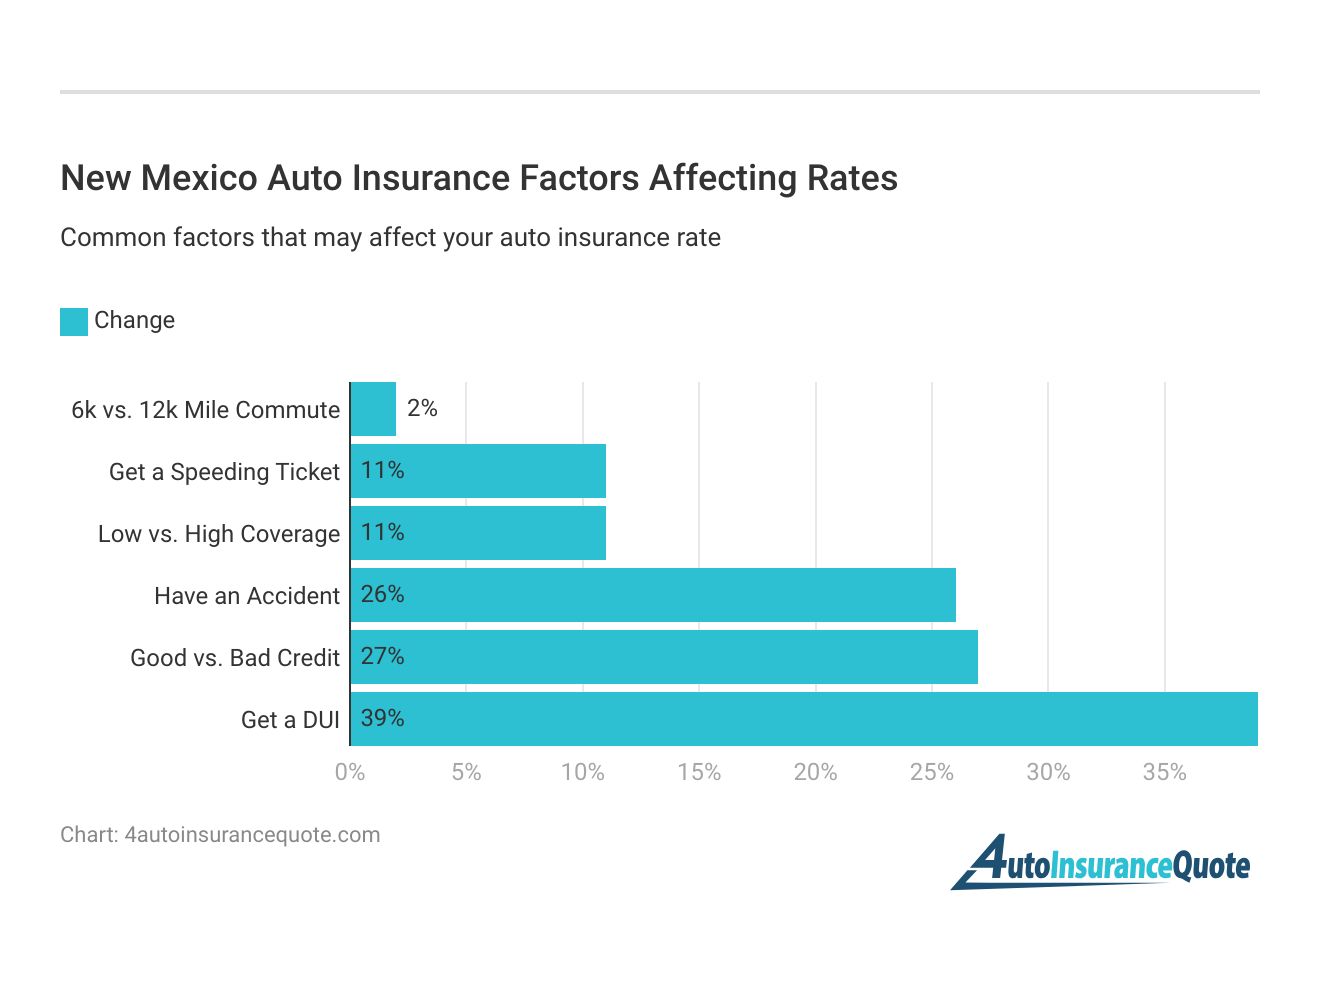 <h3>New Mexico Auto Insurance Factors Affecting Rates</h3>